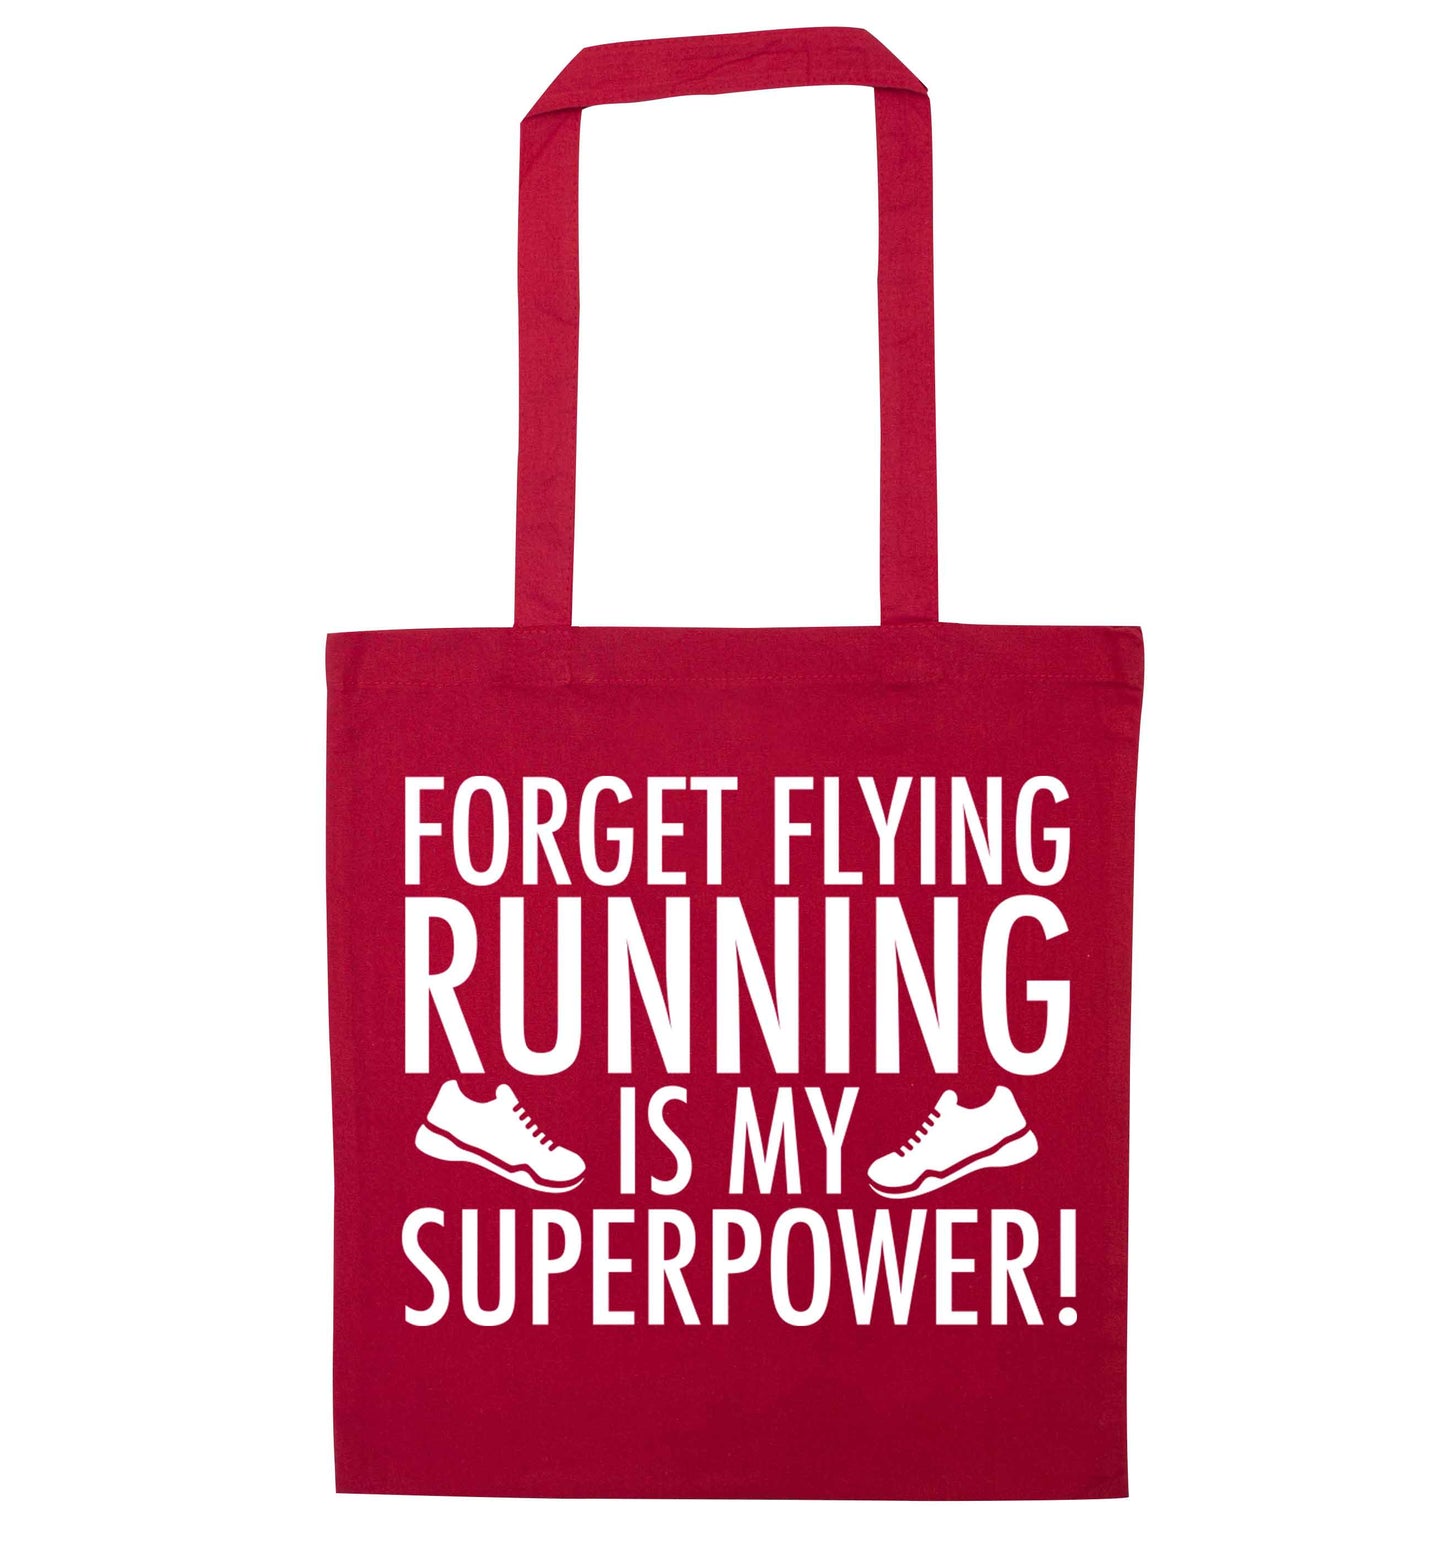 Crazy running dude red tote bag